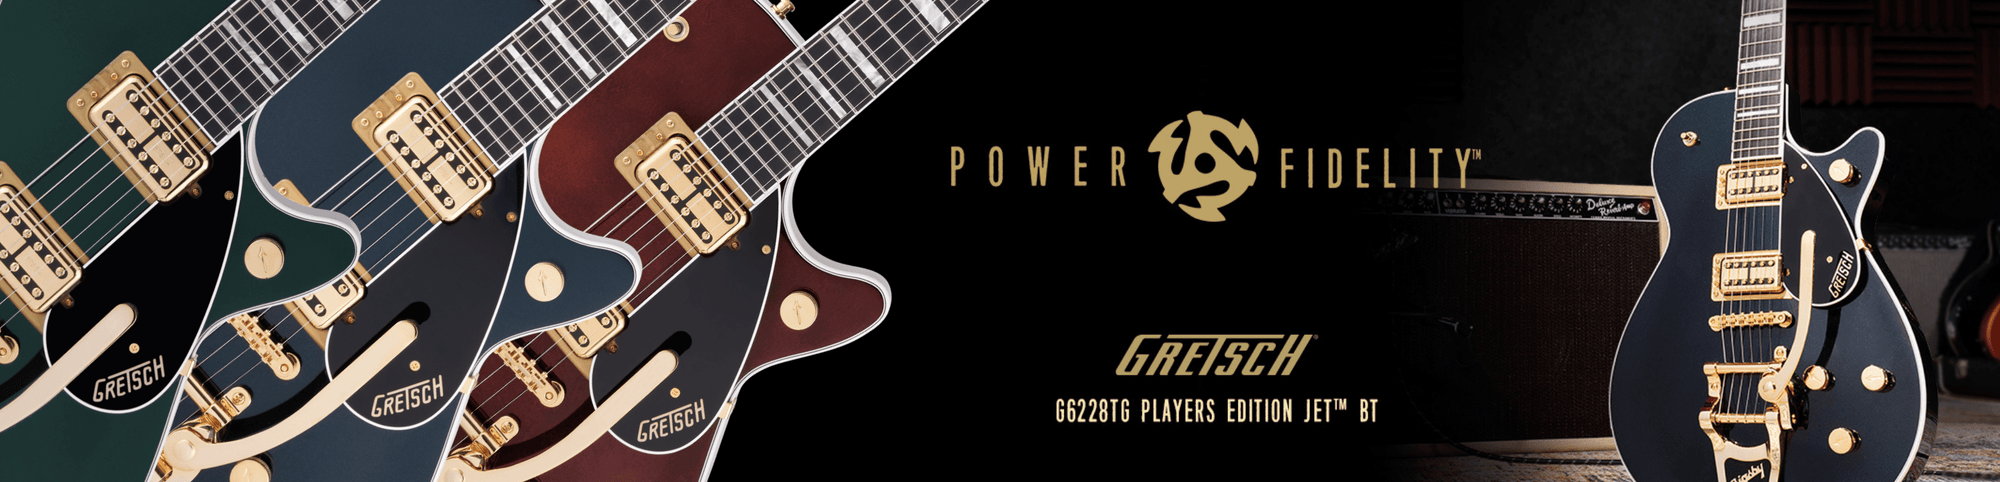 JUST ANNOUNCED: The all new Gretsch G6228TG Players Edition Jets.-Sky Music